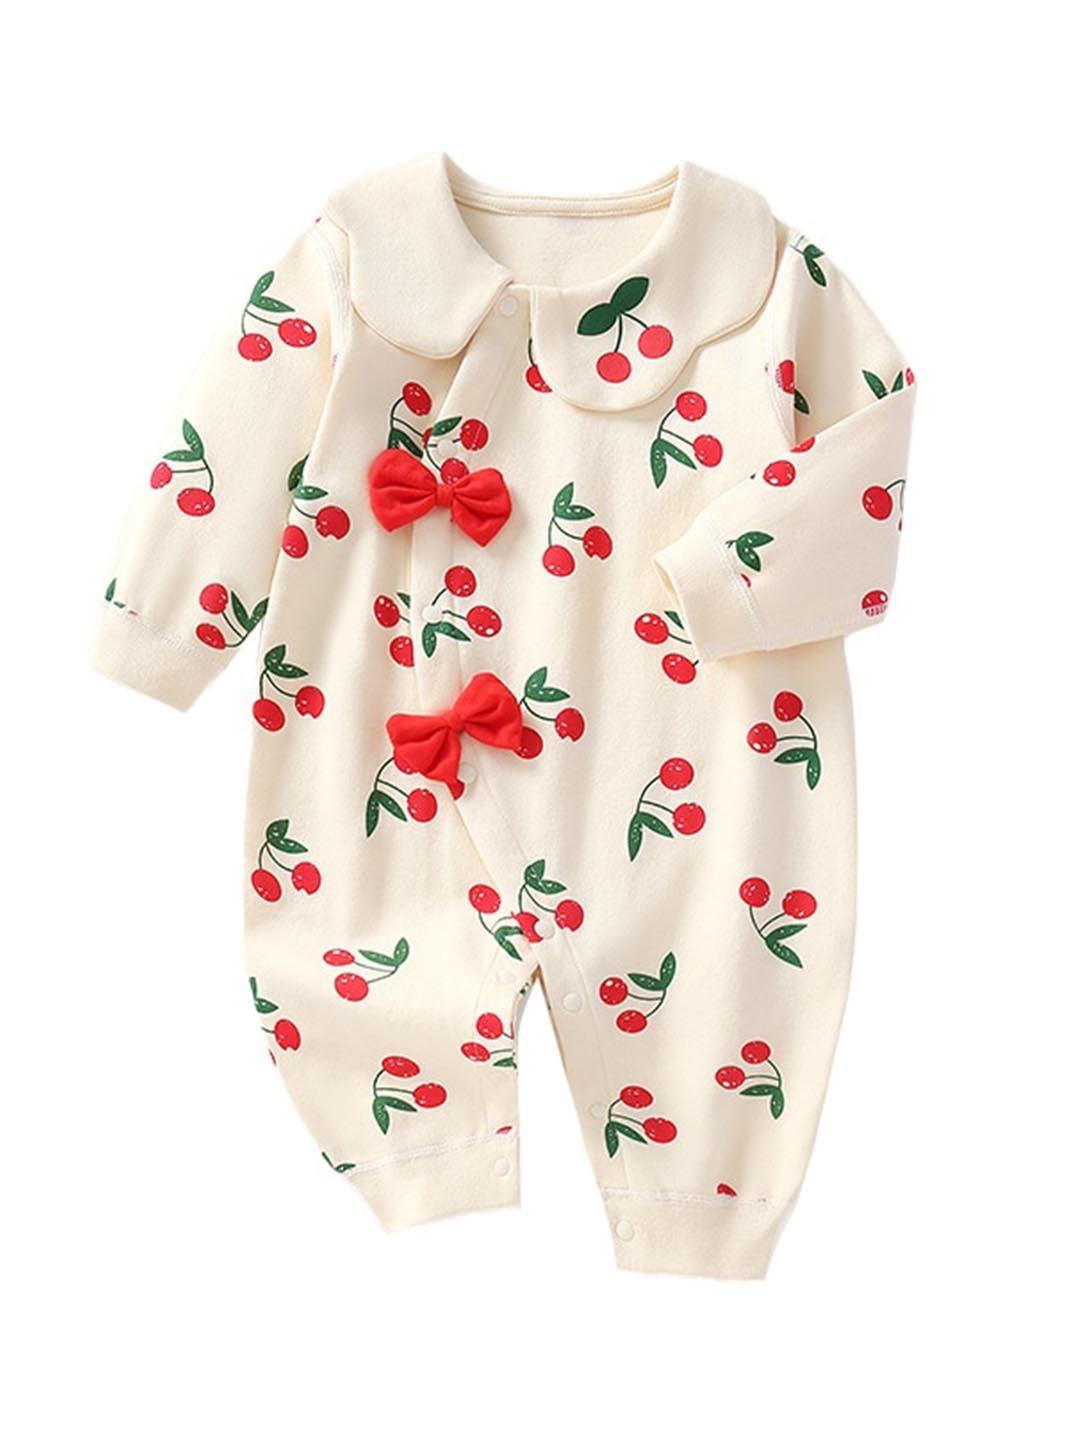 stylecast-infants-printed-cotton-rompers